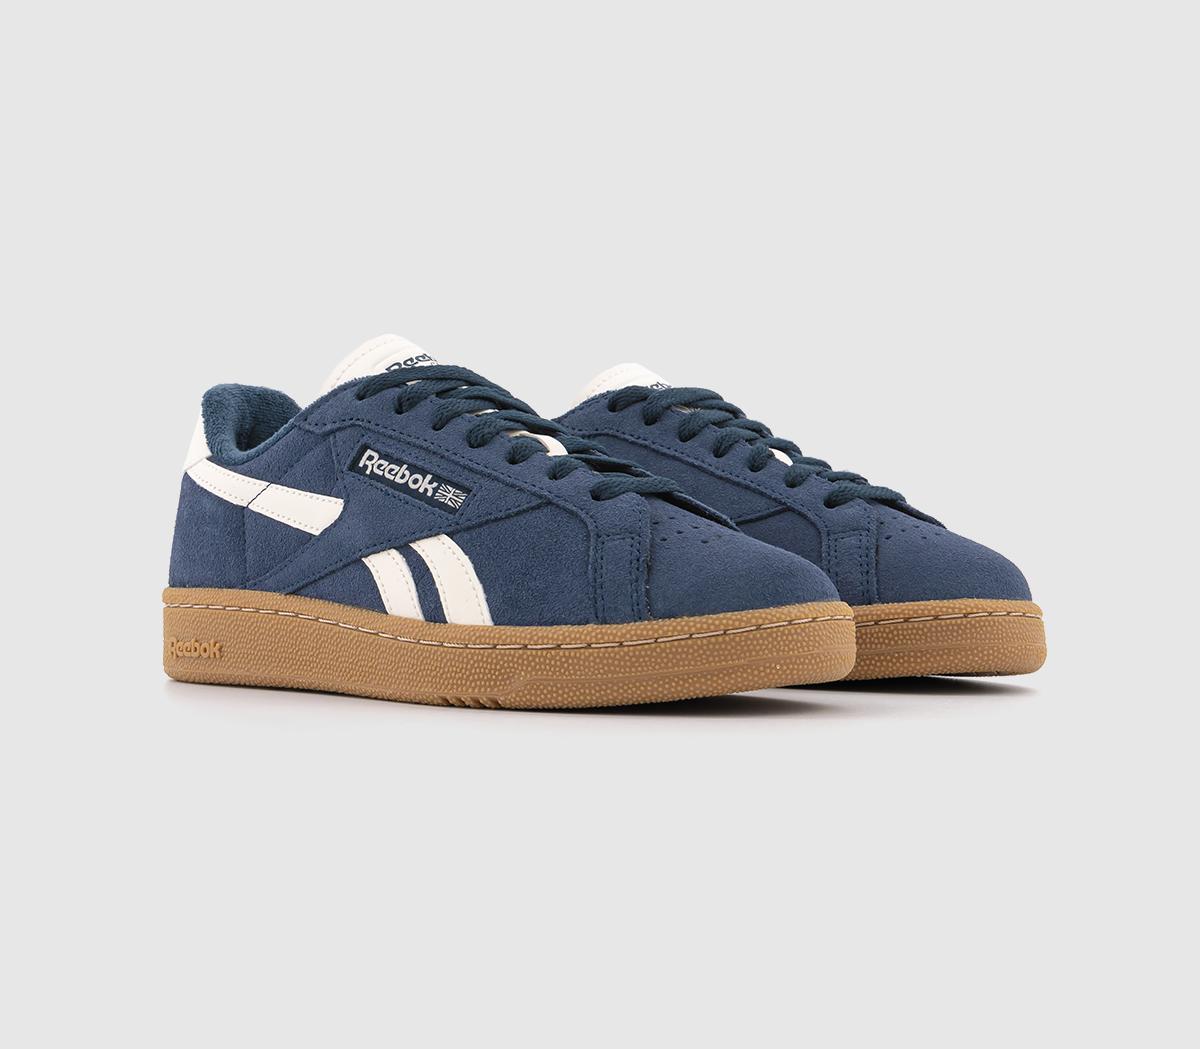 Reebok Womens Club C Grounds Trainers Vector Navy Blue, 8.5